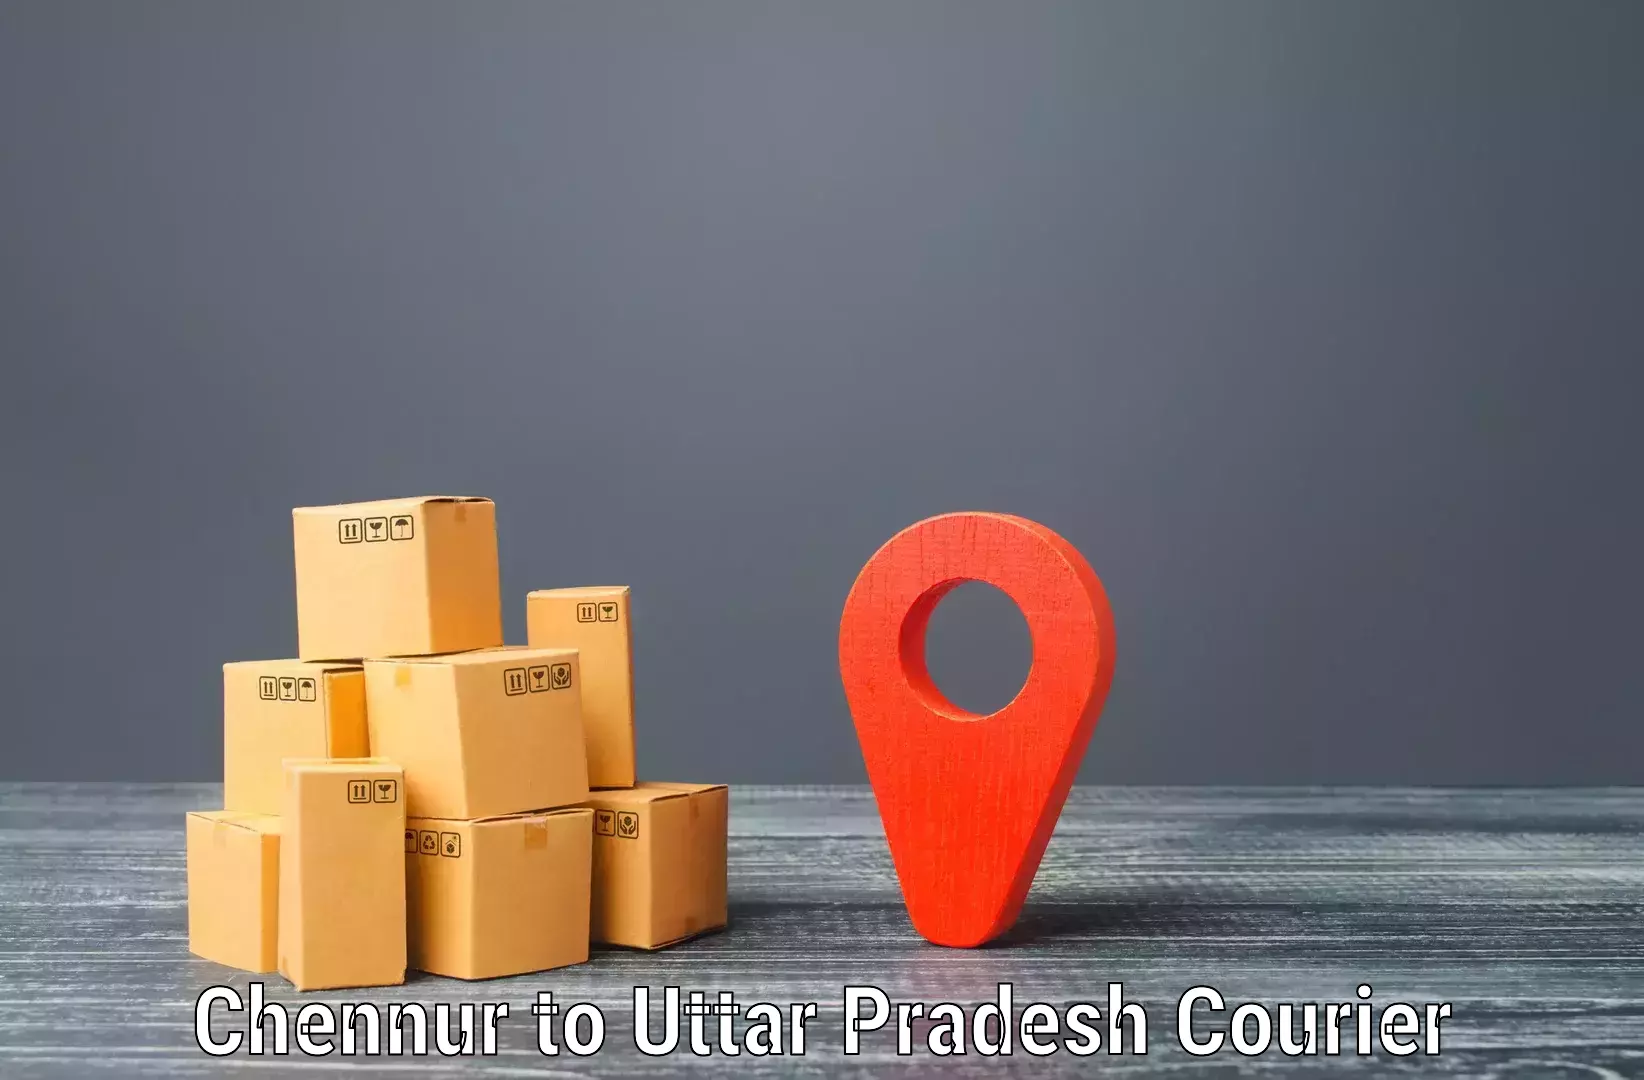 Courier service booking Chennur to Kanth